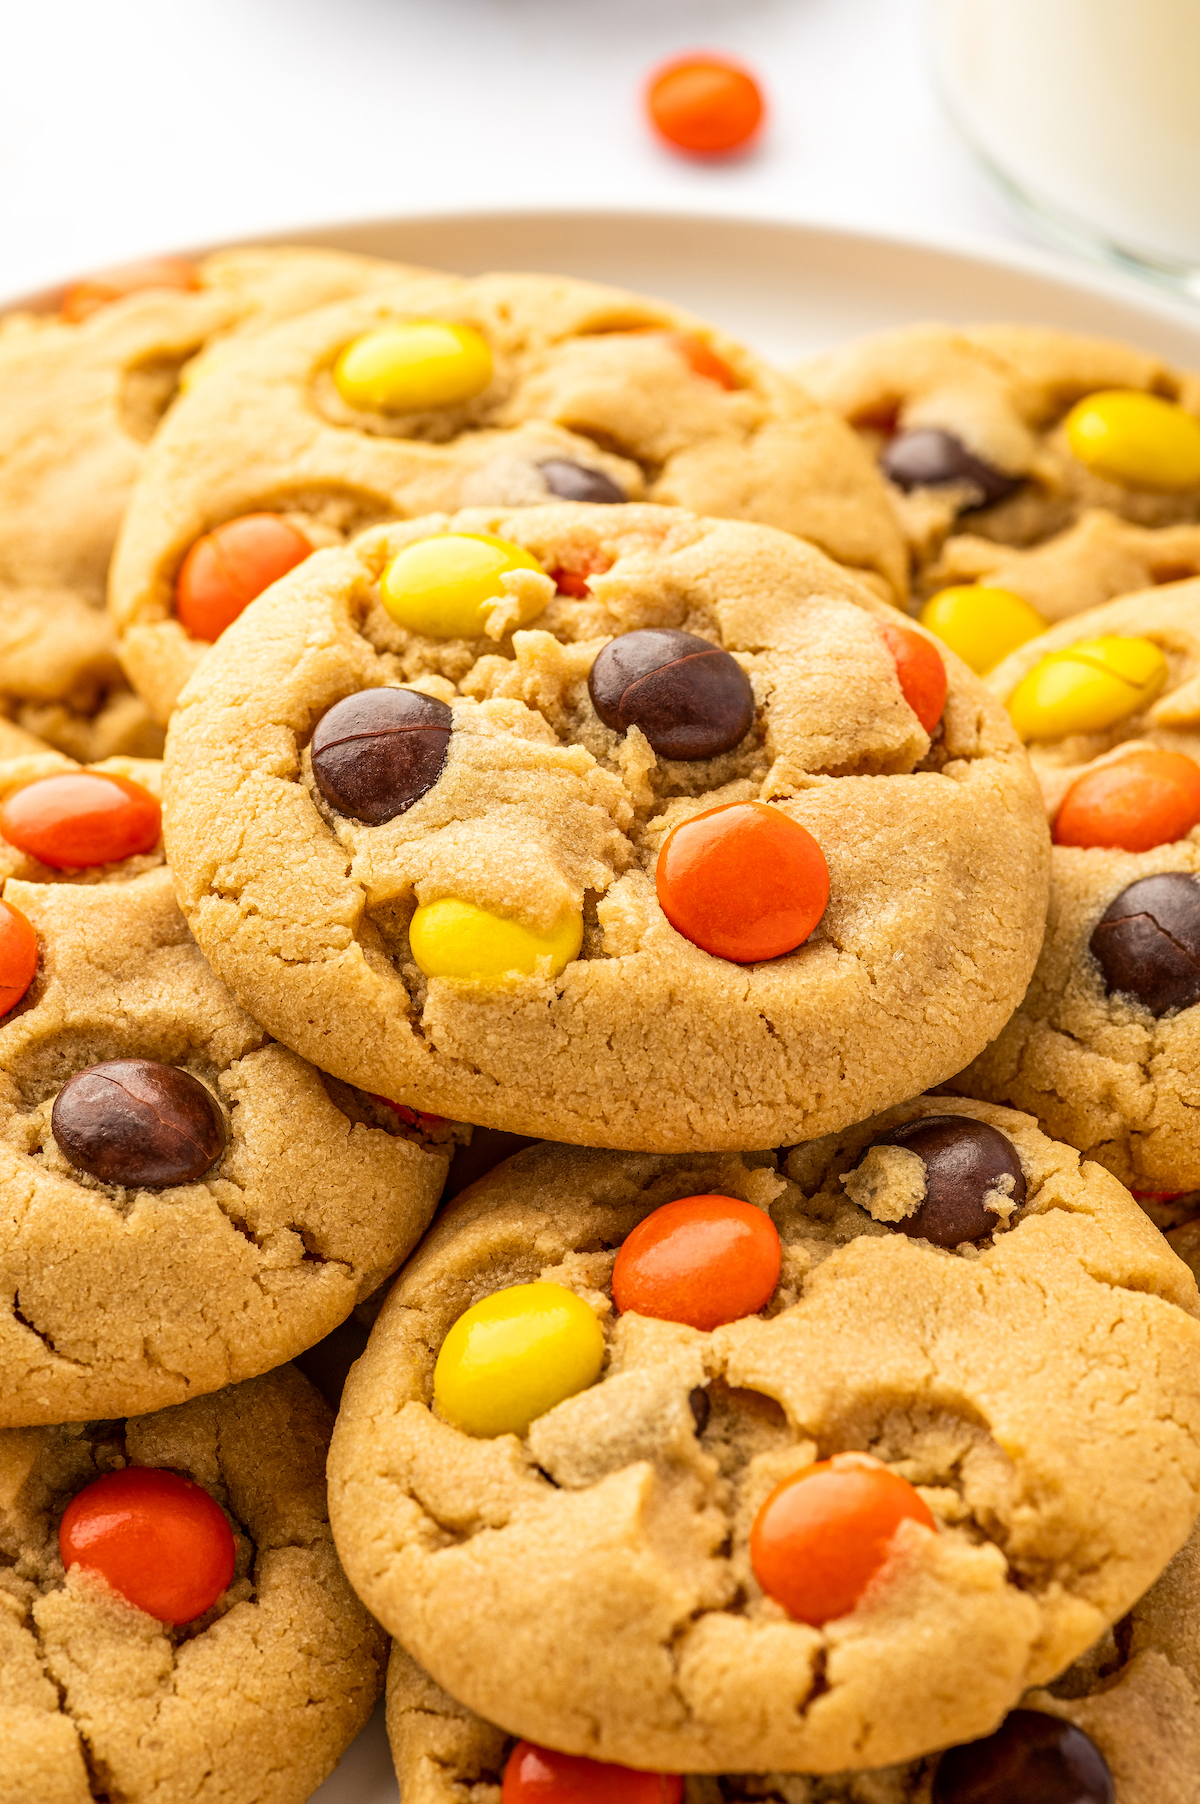 https://thenovicechefblog.com/wp-content/uploads/2014/04/Reeses-Pieces-Cookies-12.jpeg